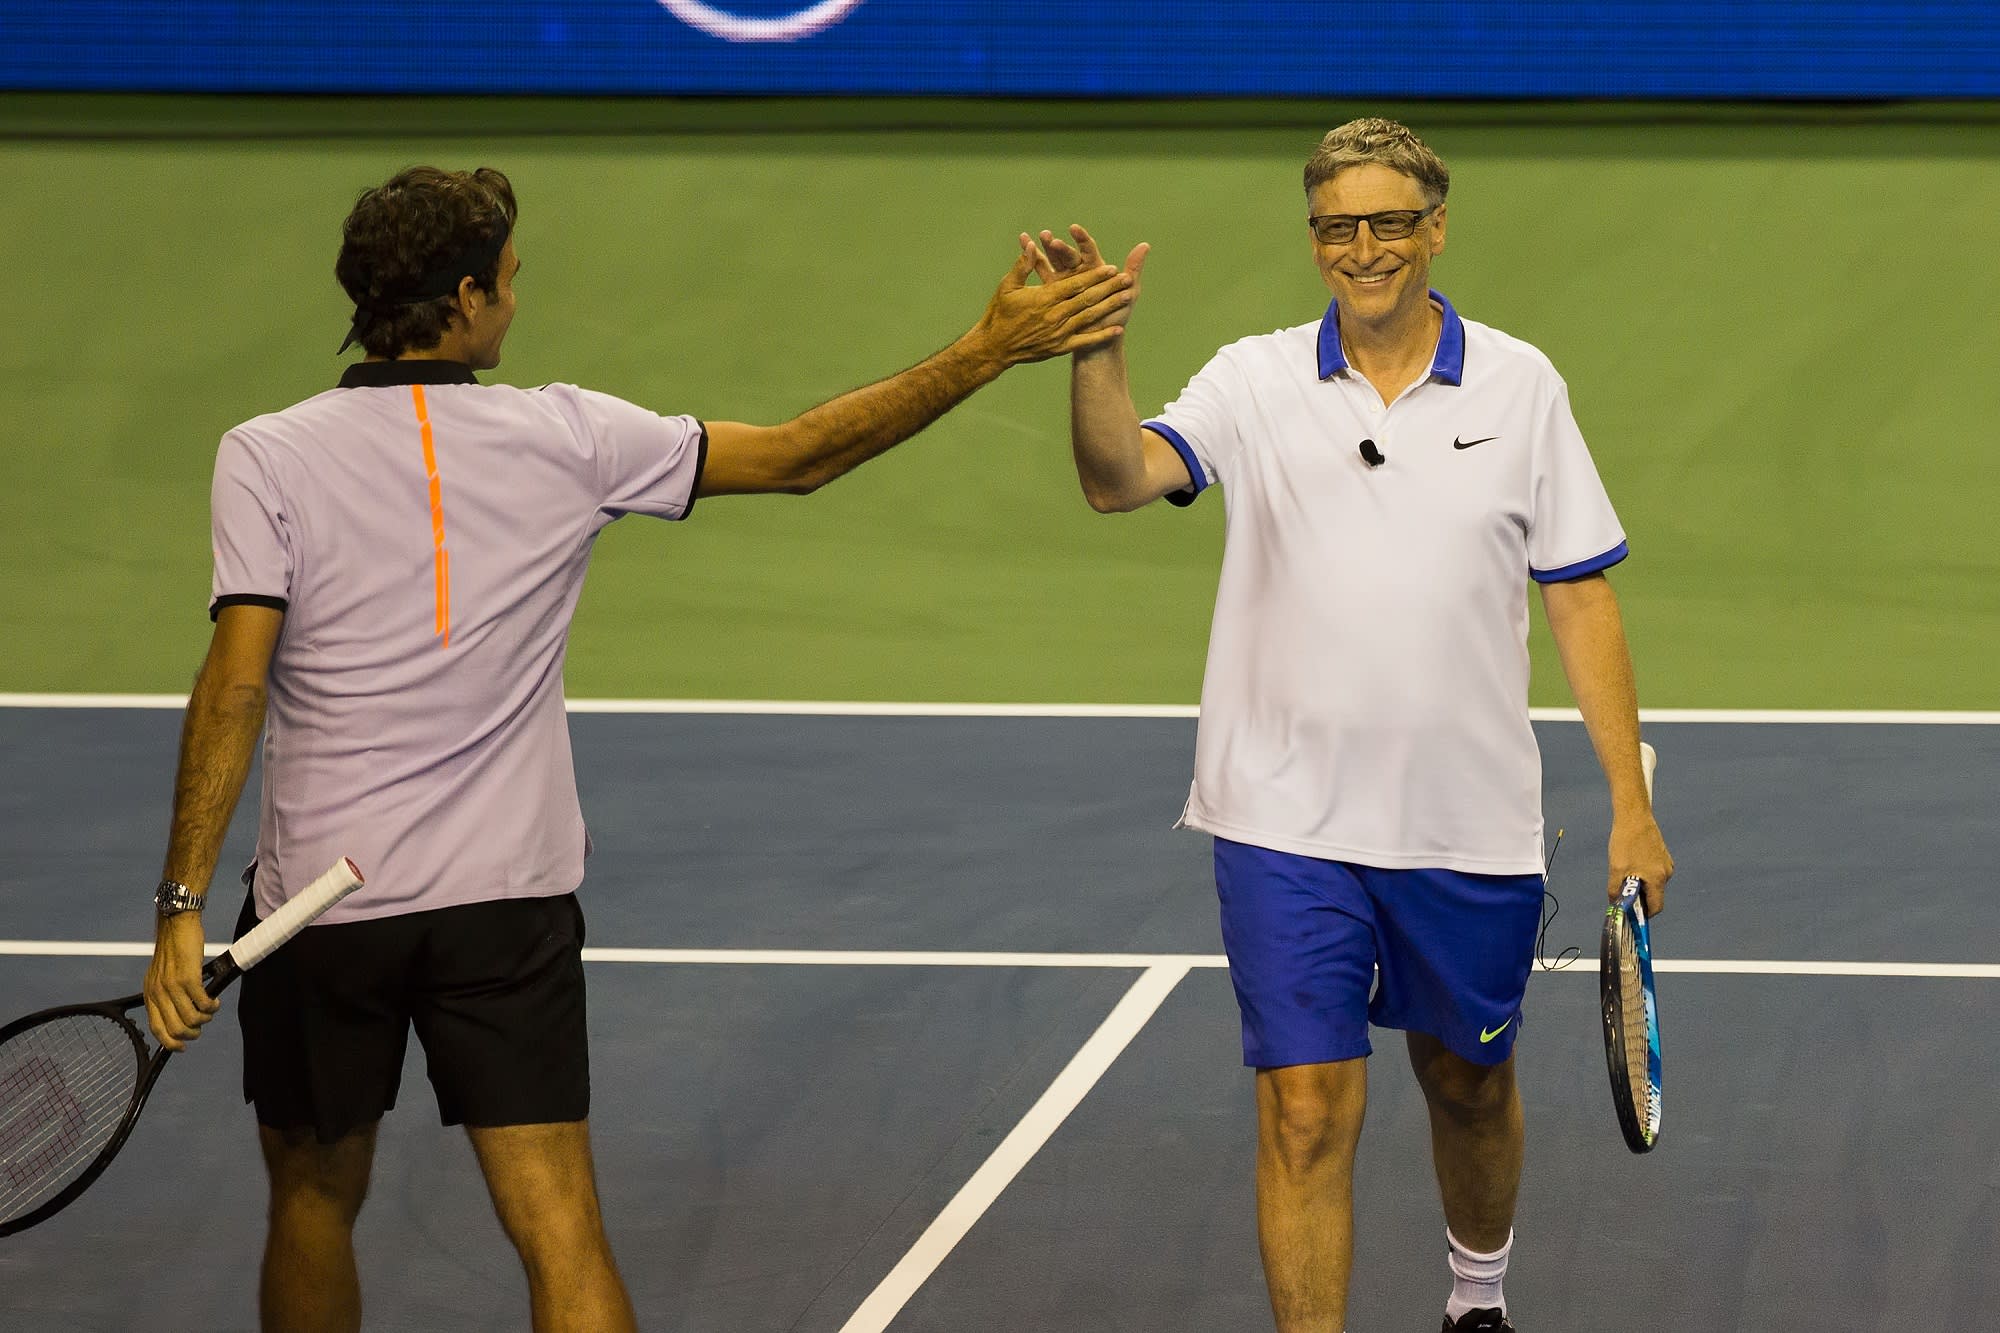 Bill Gates happily playing tennis